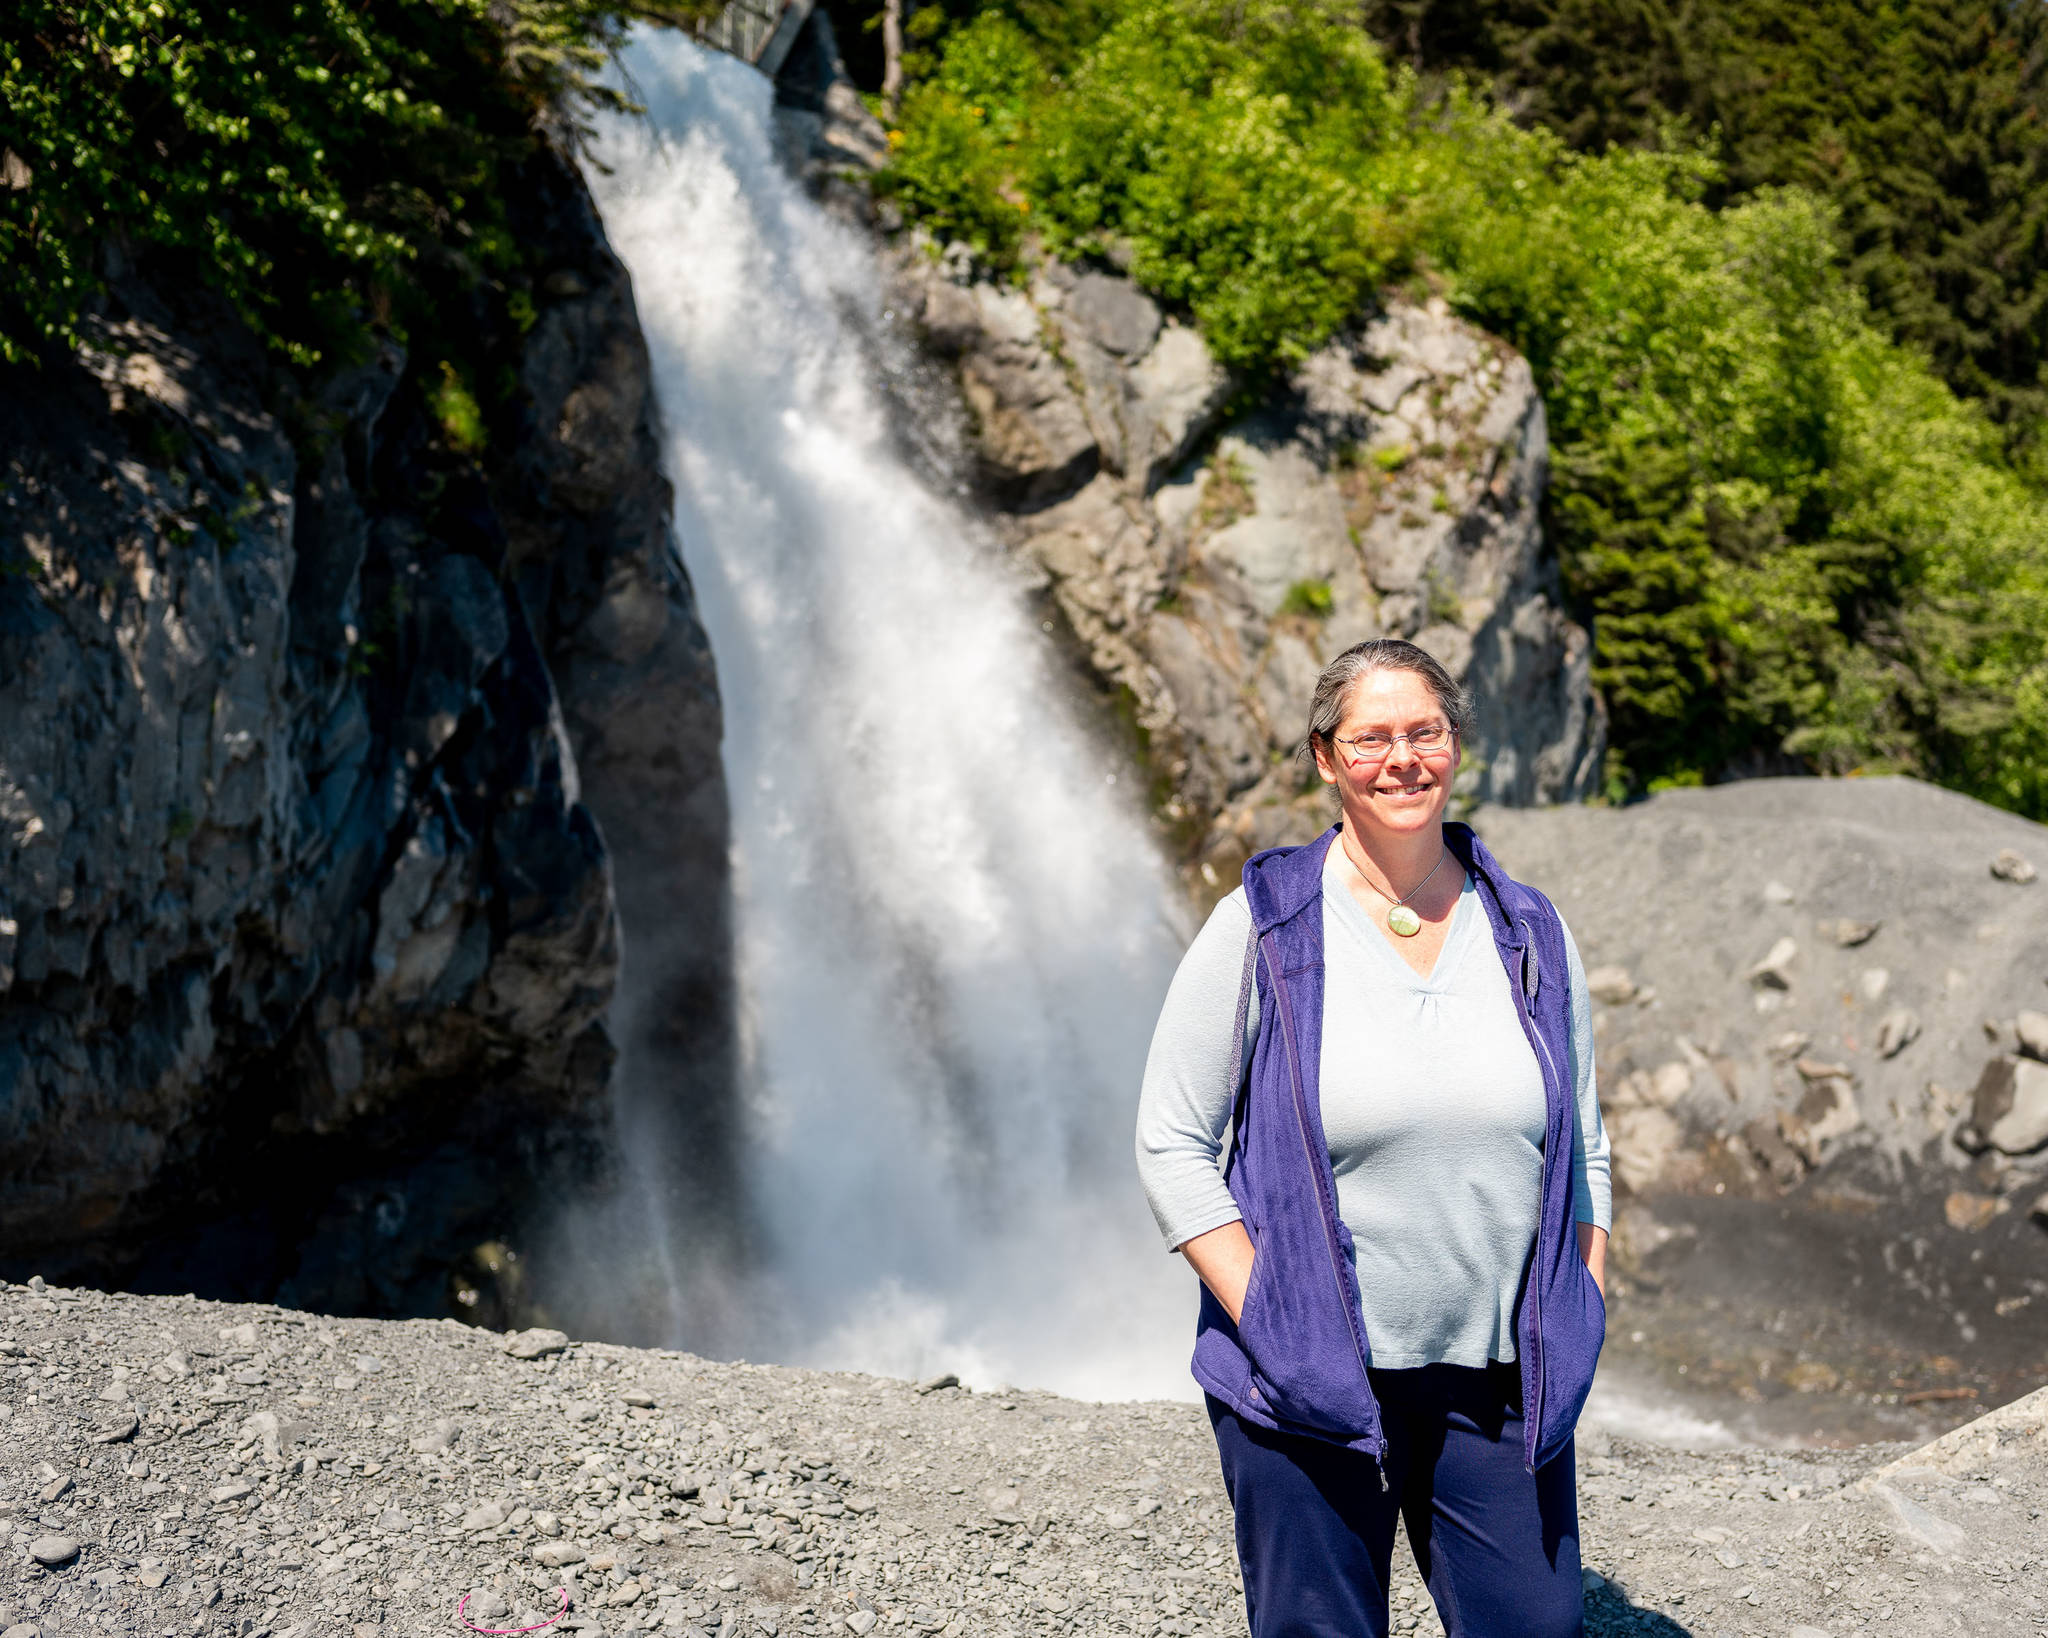 In June 2021, Stephanie Presley, program lead for the Seward-Bear Creek Flood Service Area, stands in front of the Lowell Creek waterfall, which is caused by one of Seward’s most important flood mitigation efforts to divert Lowell Creek away from the center of town and tunnel it directly into nearby Resurrection Bay. (Young Kim for The Hechinger Report)